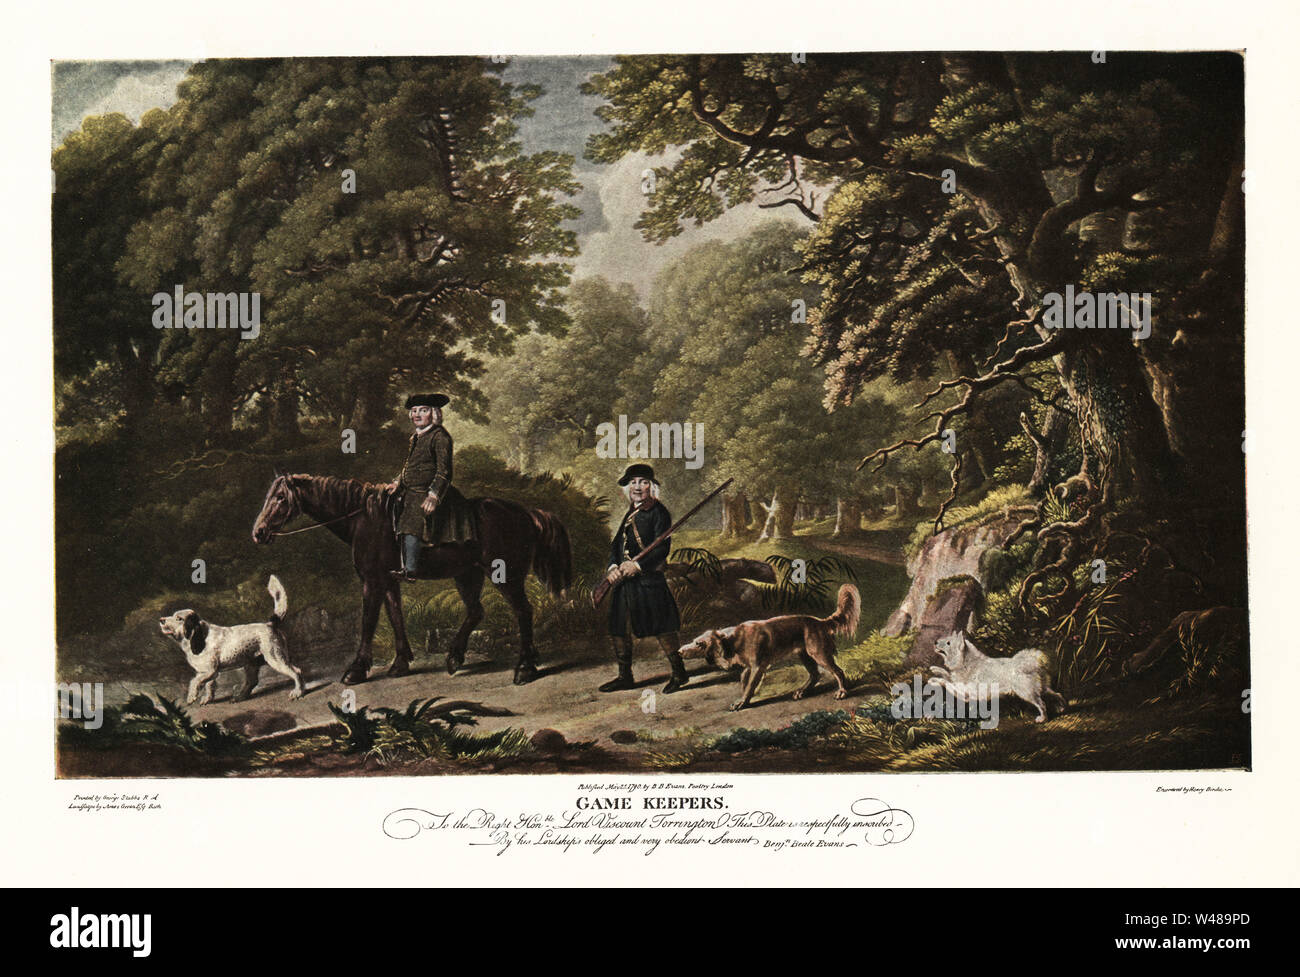 Game keepers. Estate workers in a park with fox hounds and horse, 18th century. Painted by George Stubbs, landscape by Amos Green, engraved bby Henry Birche. Color print in Ralph Nevill’s Old Sporting Prints, The Connoisseur Magazine, London, 1908. Stock Photo